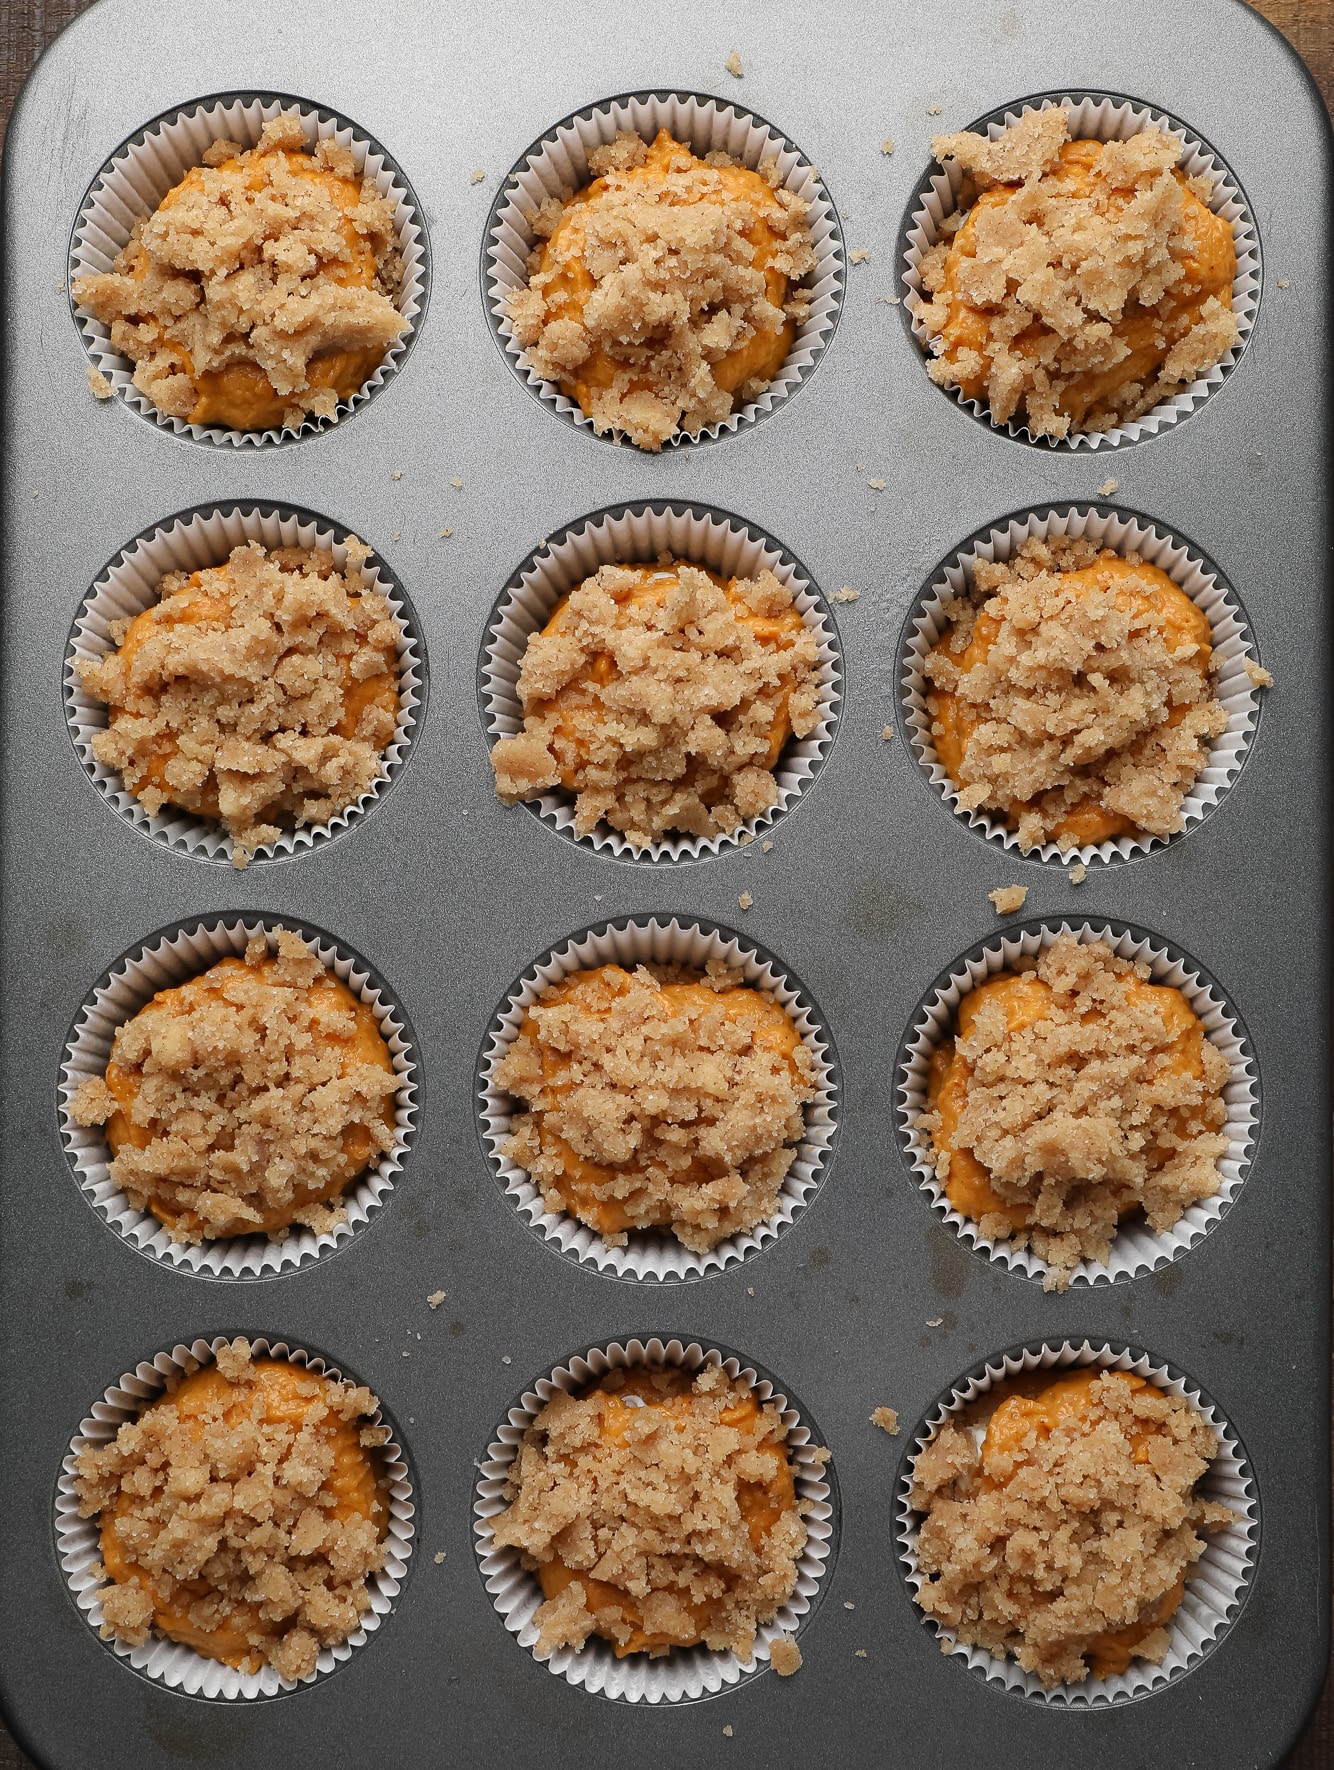 unbaked vegan pumpkin cream cheese muffins topped with cinnamon streusel in a muffin tin.